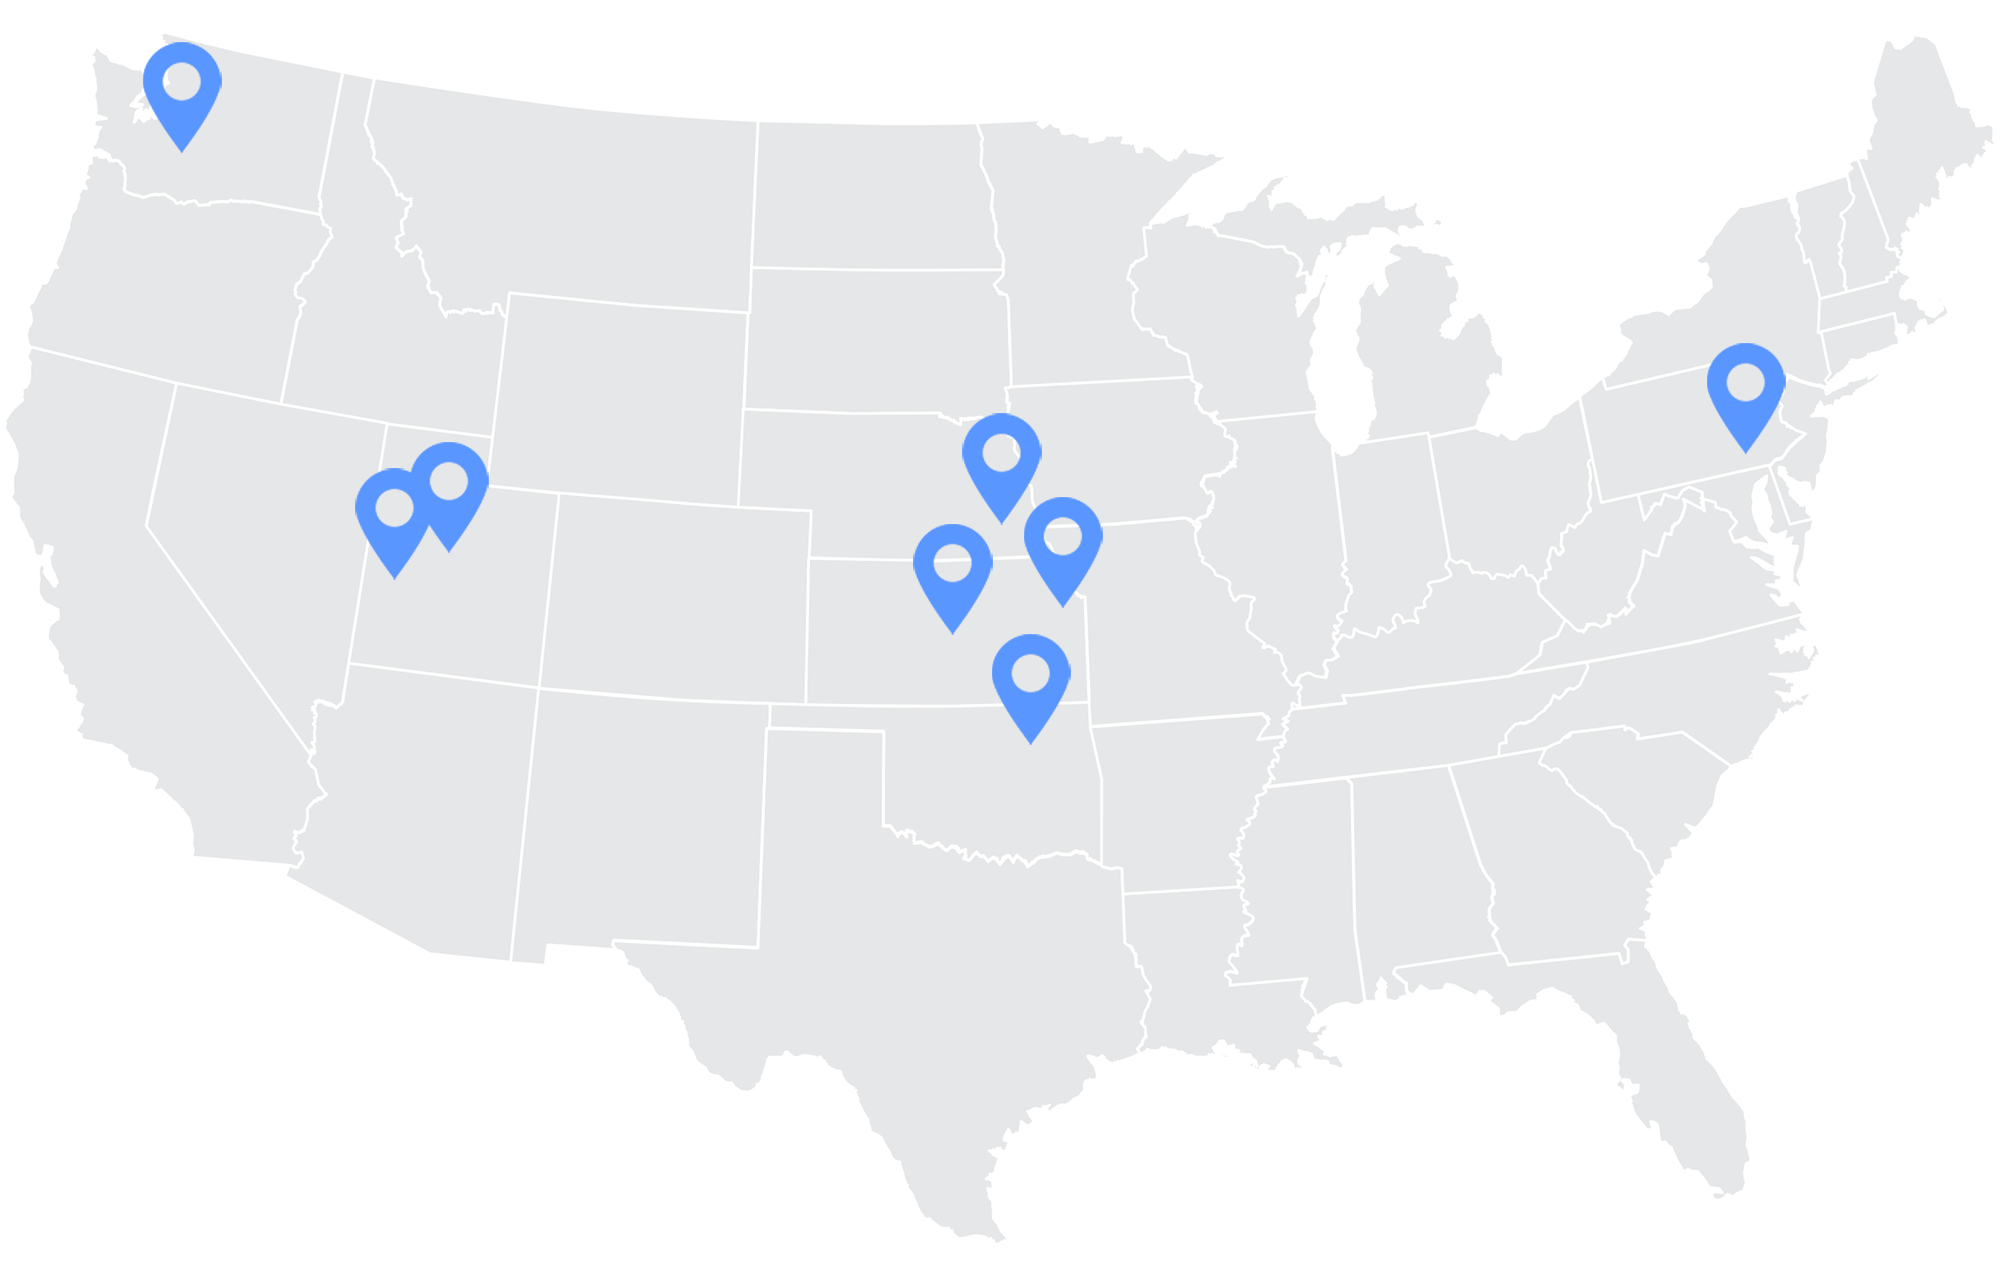 US map with blue markers showing Alphia facility locations.